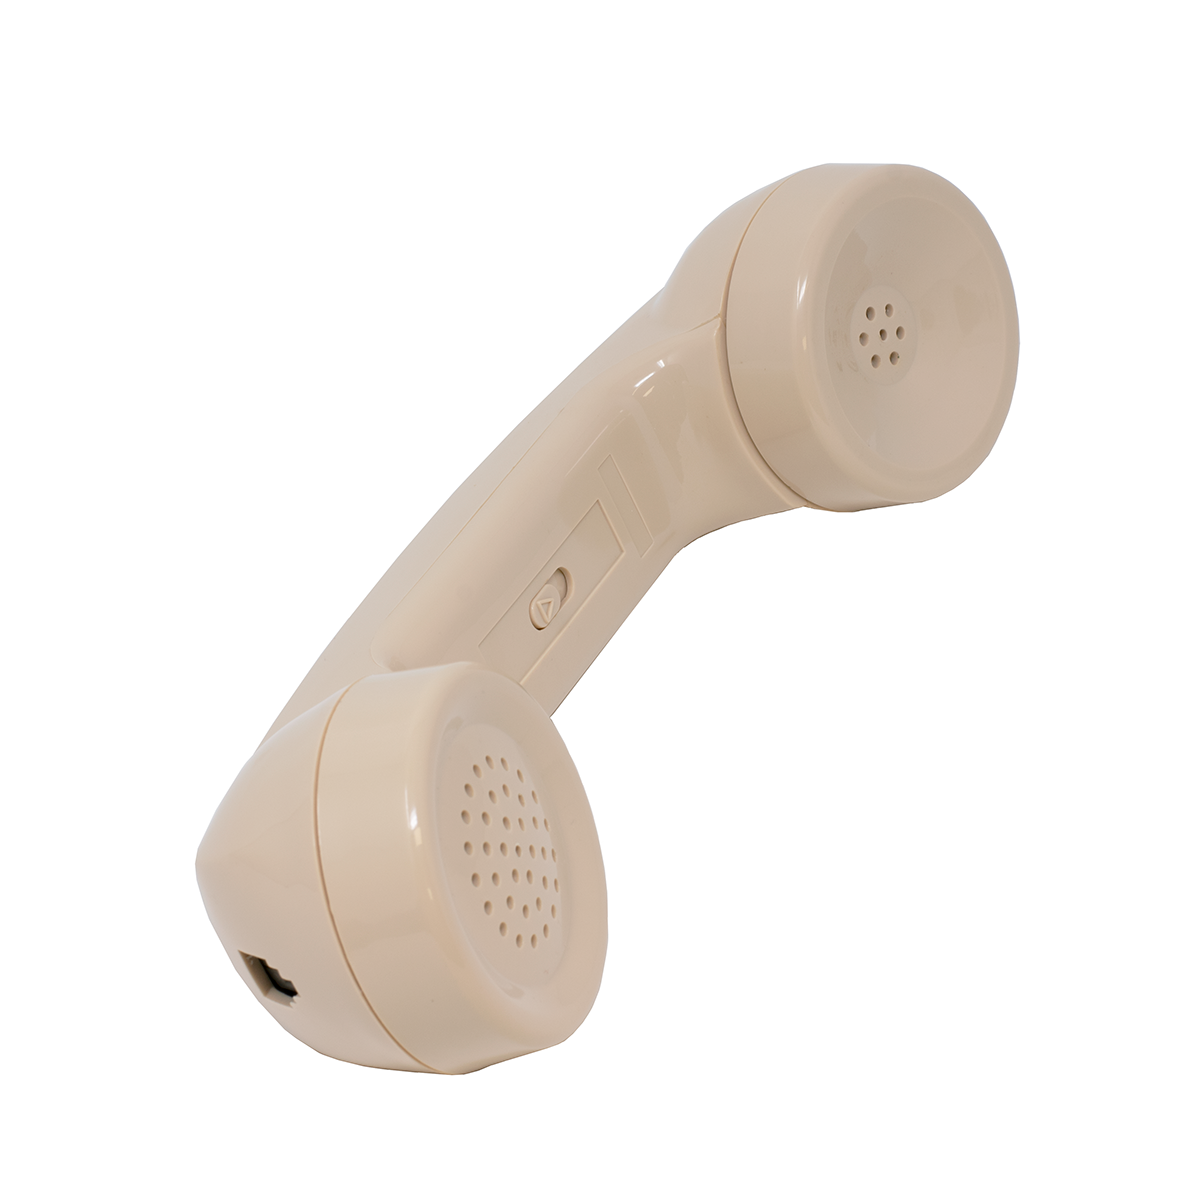 Ivory Amplified Replacement Handset for 2500/2554 Phones